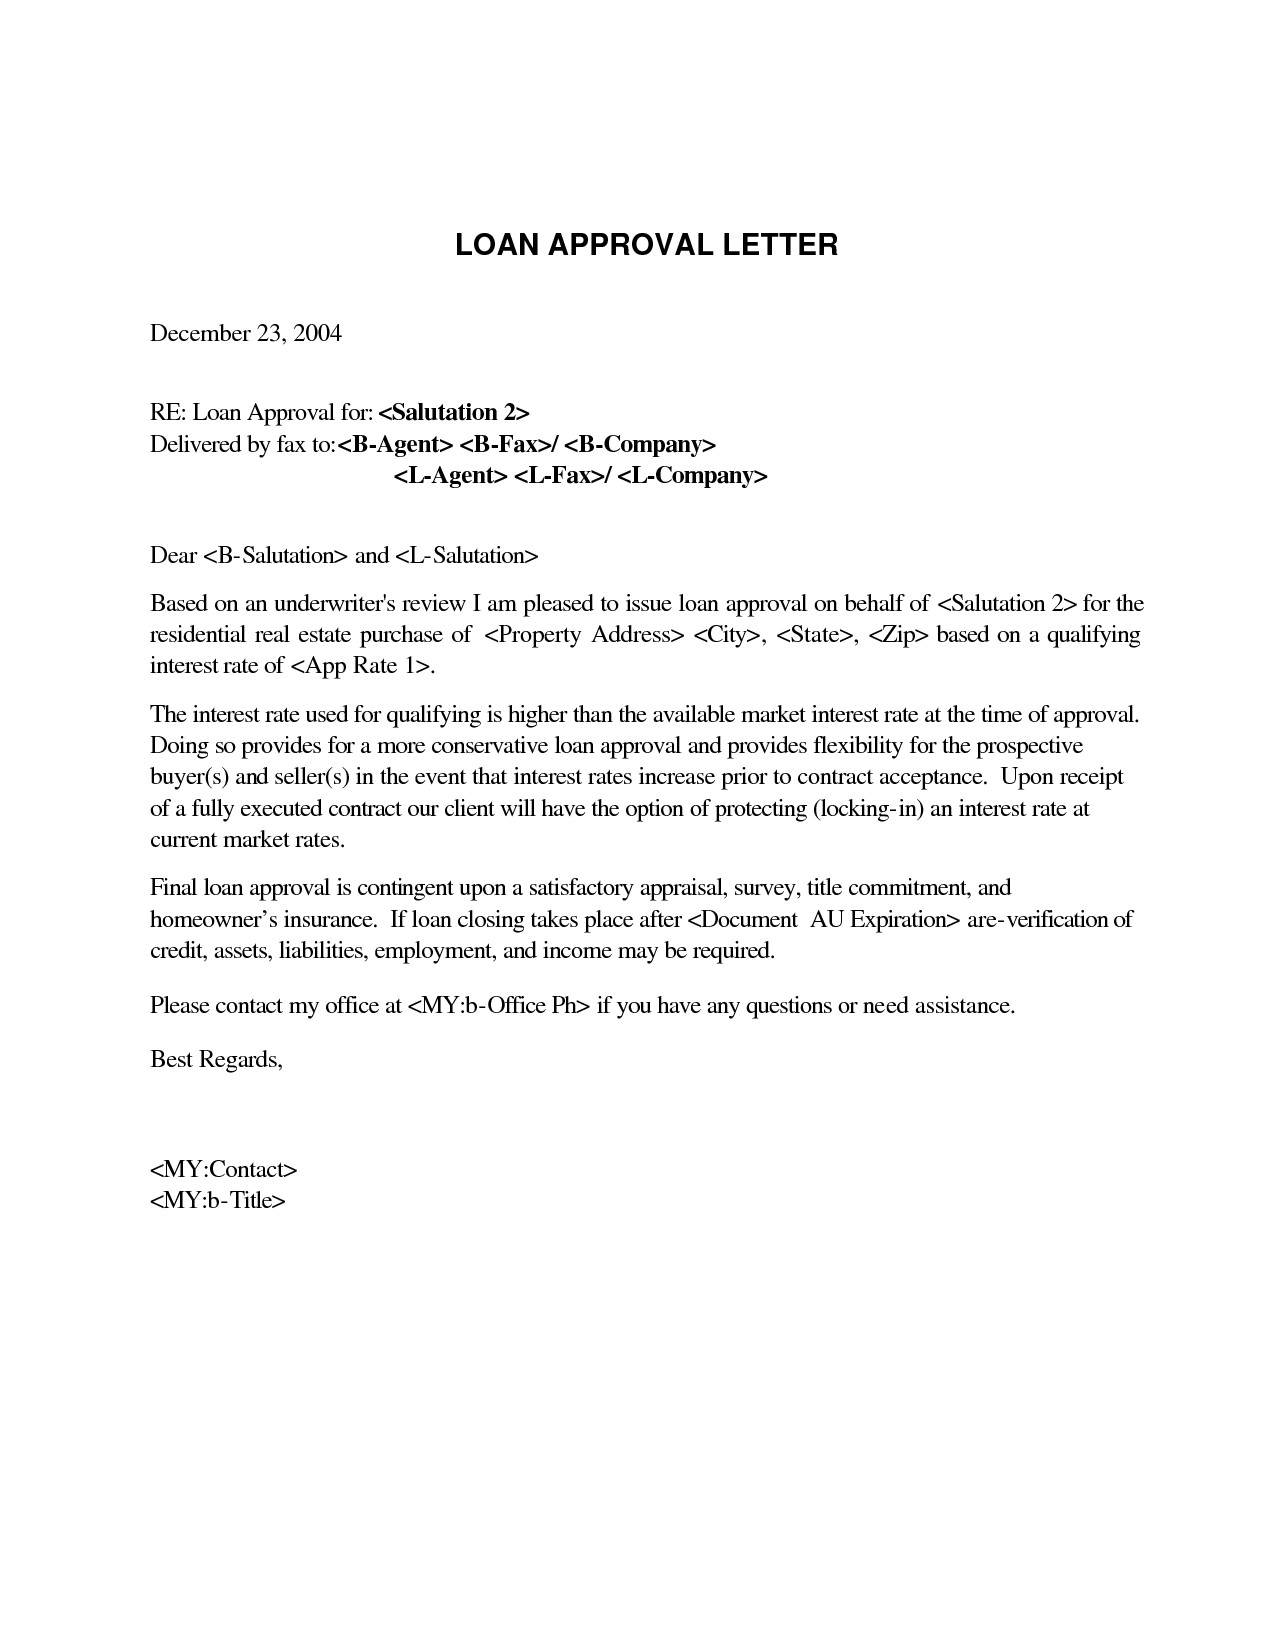 Commercial Real Estate Prospecting Letter Template - Letter format for Loan Request From Employer New Real Estate